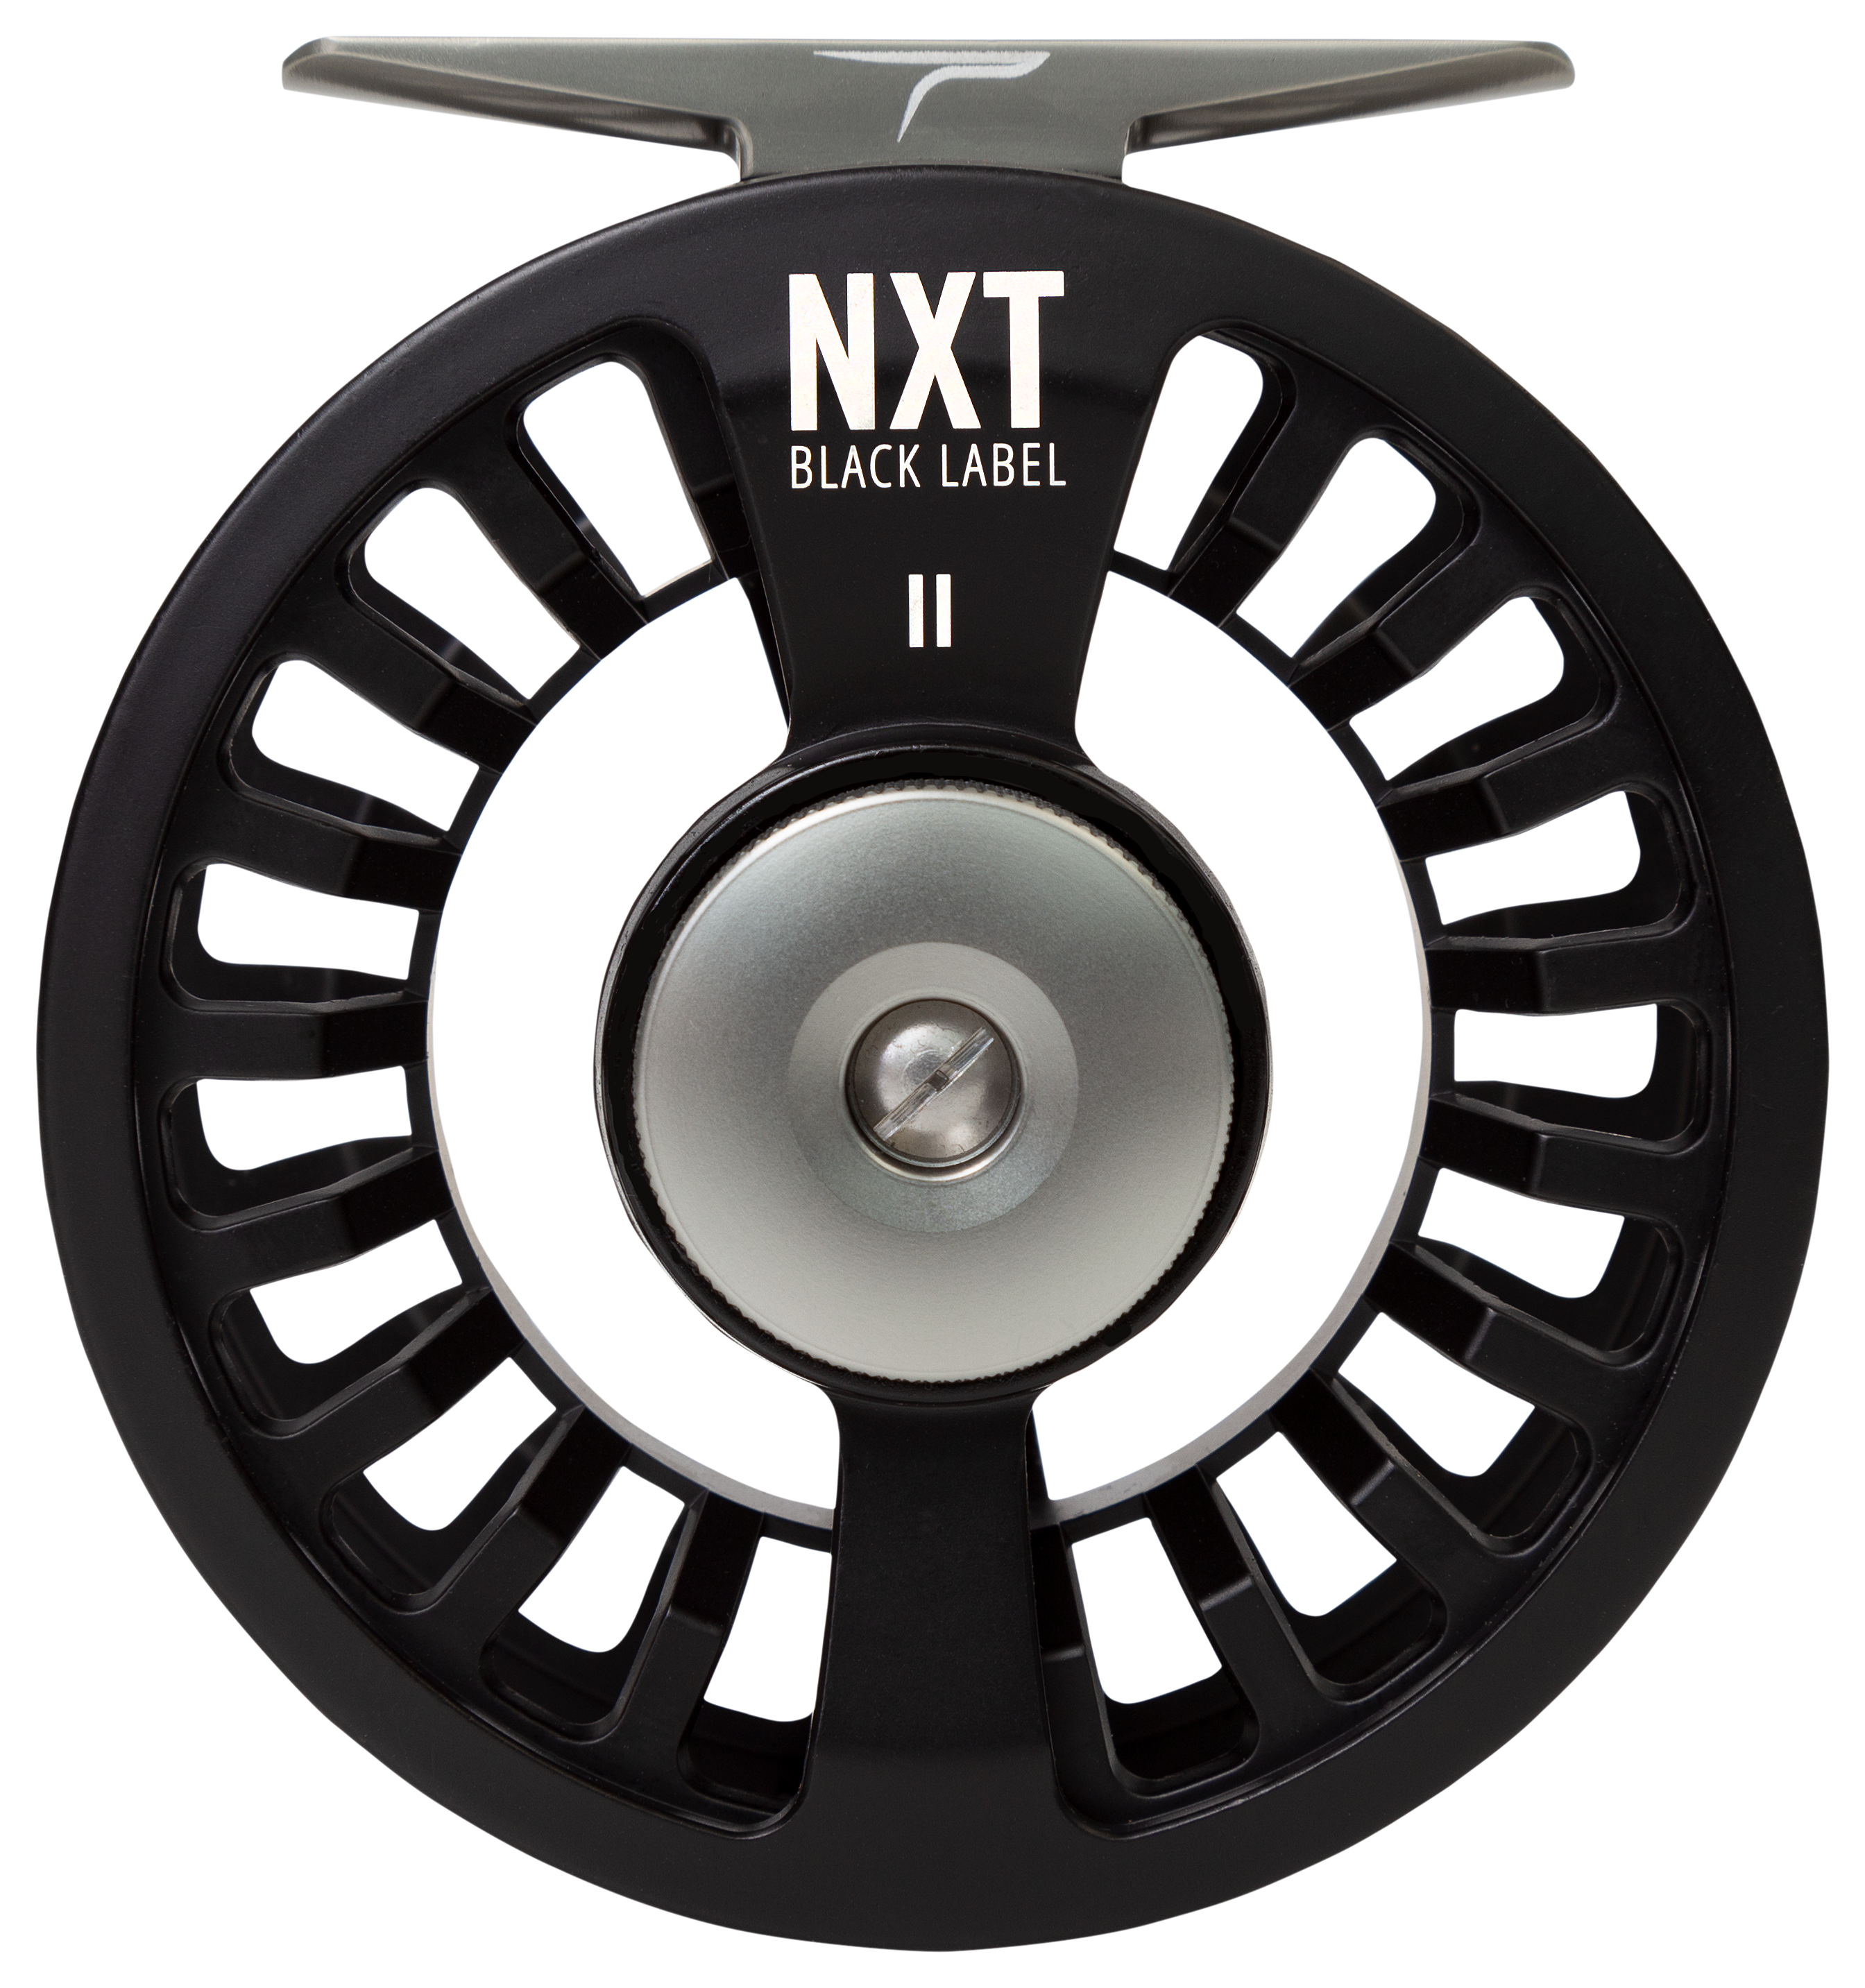 Temple Fork Outfitters NXT Black Label Fly Reel - TFR NXT BLK I